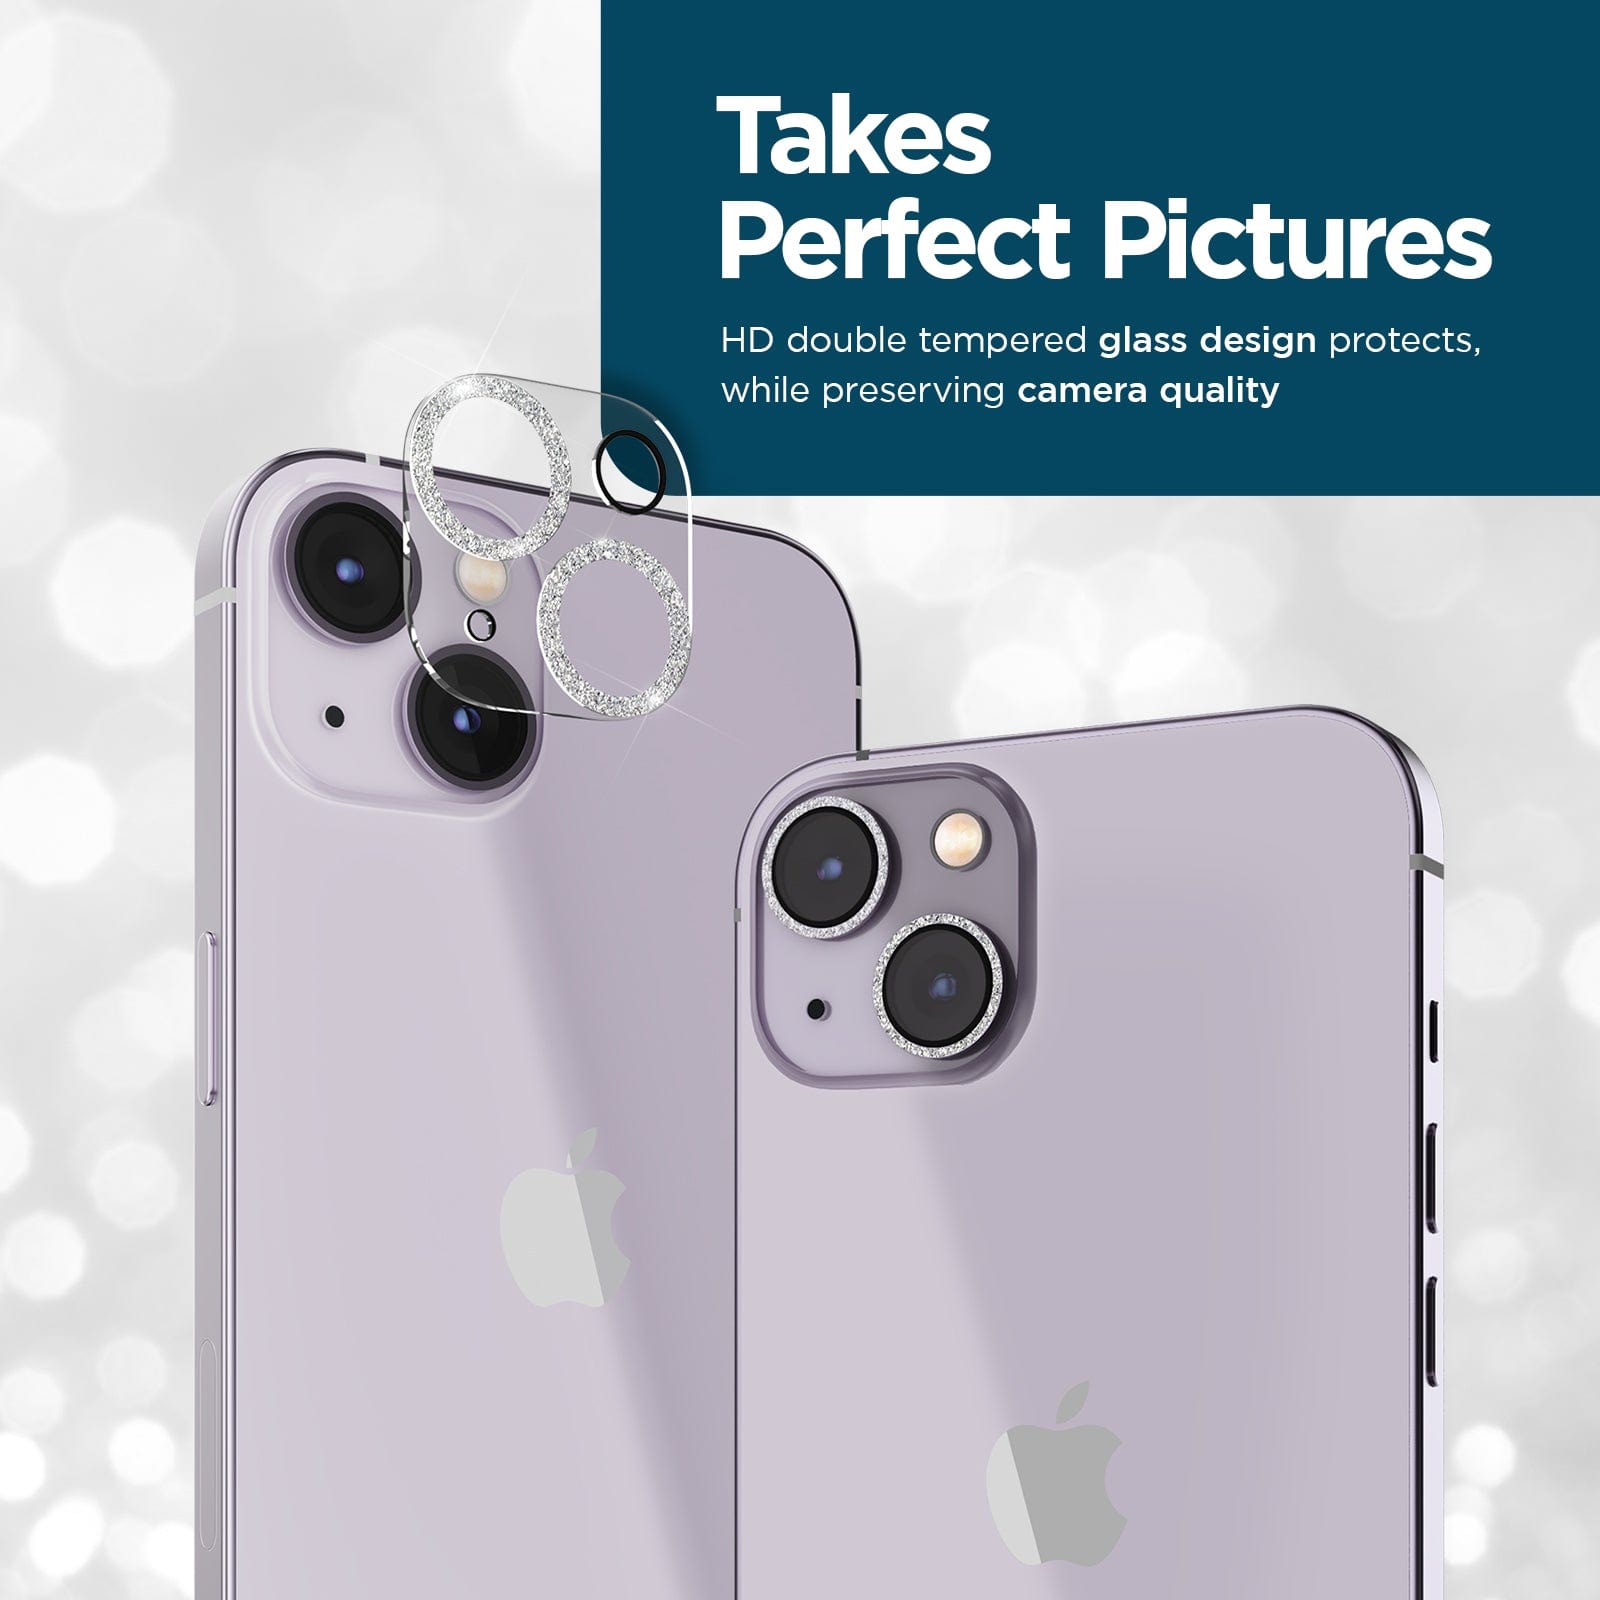 TAKES PERFECT PICTURES. HD DOUBLE TEMPERED GLASS PROTECTS WHILE PERSERVING CAMERA QUALITY